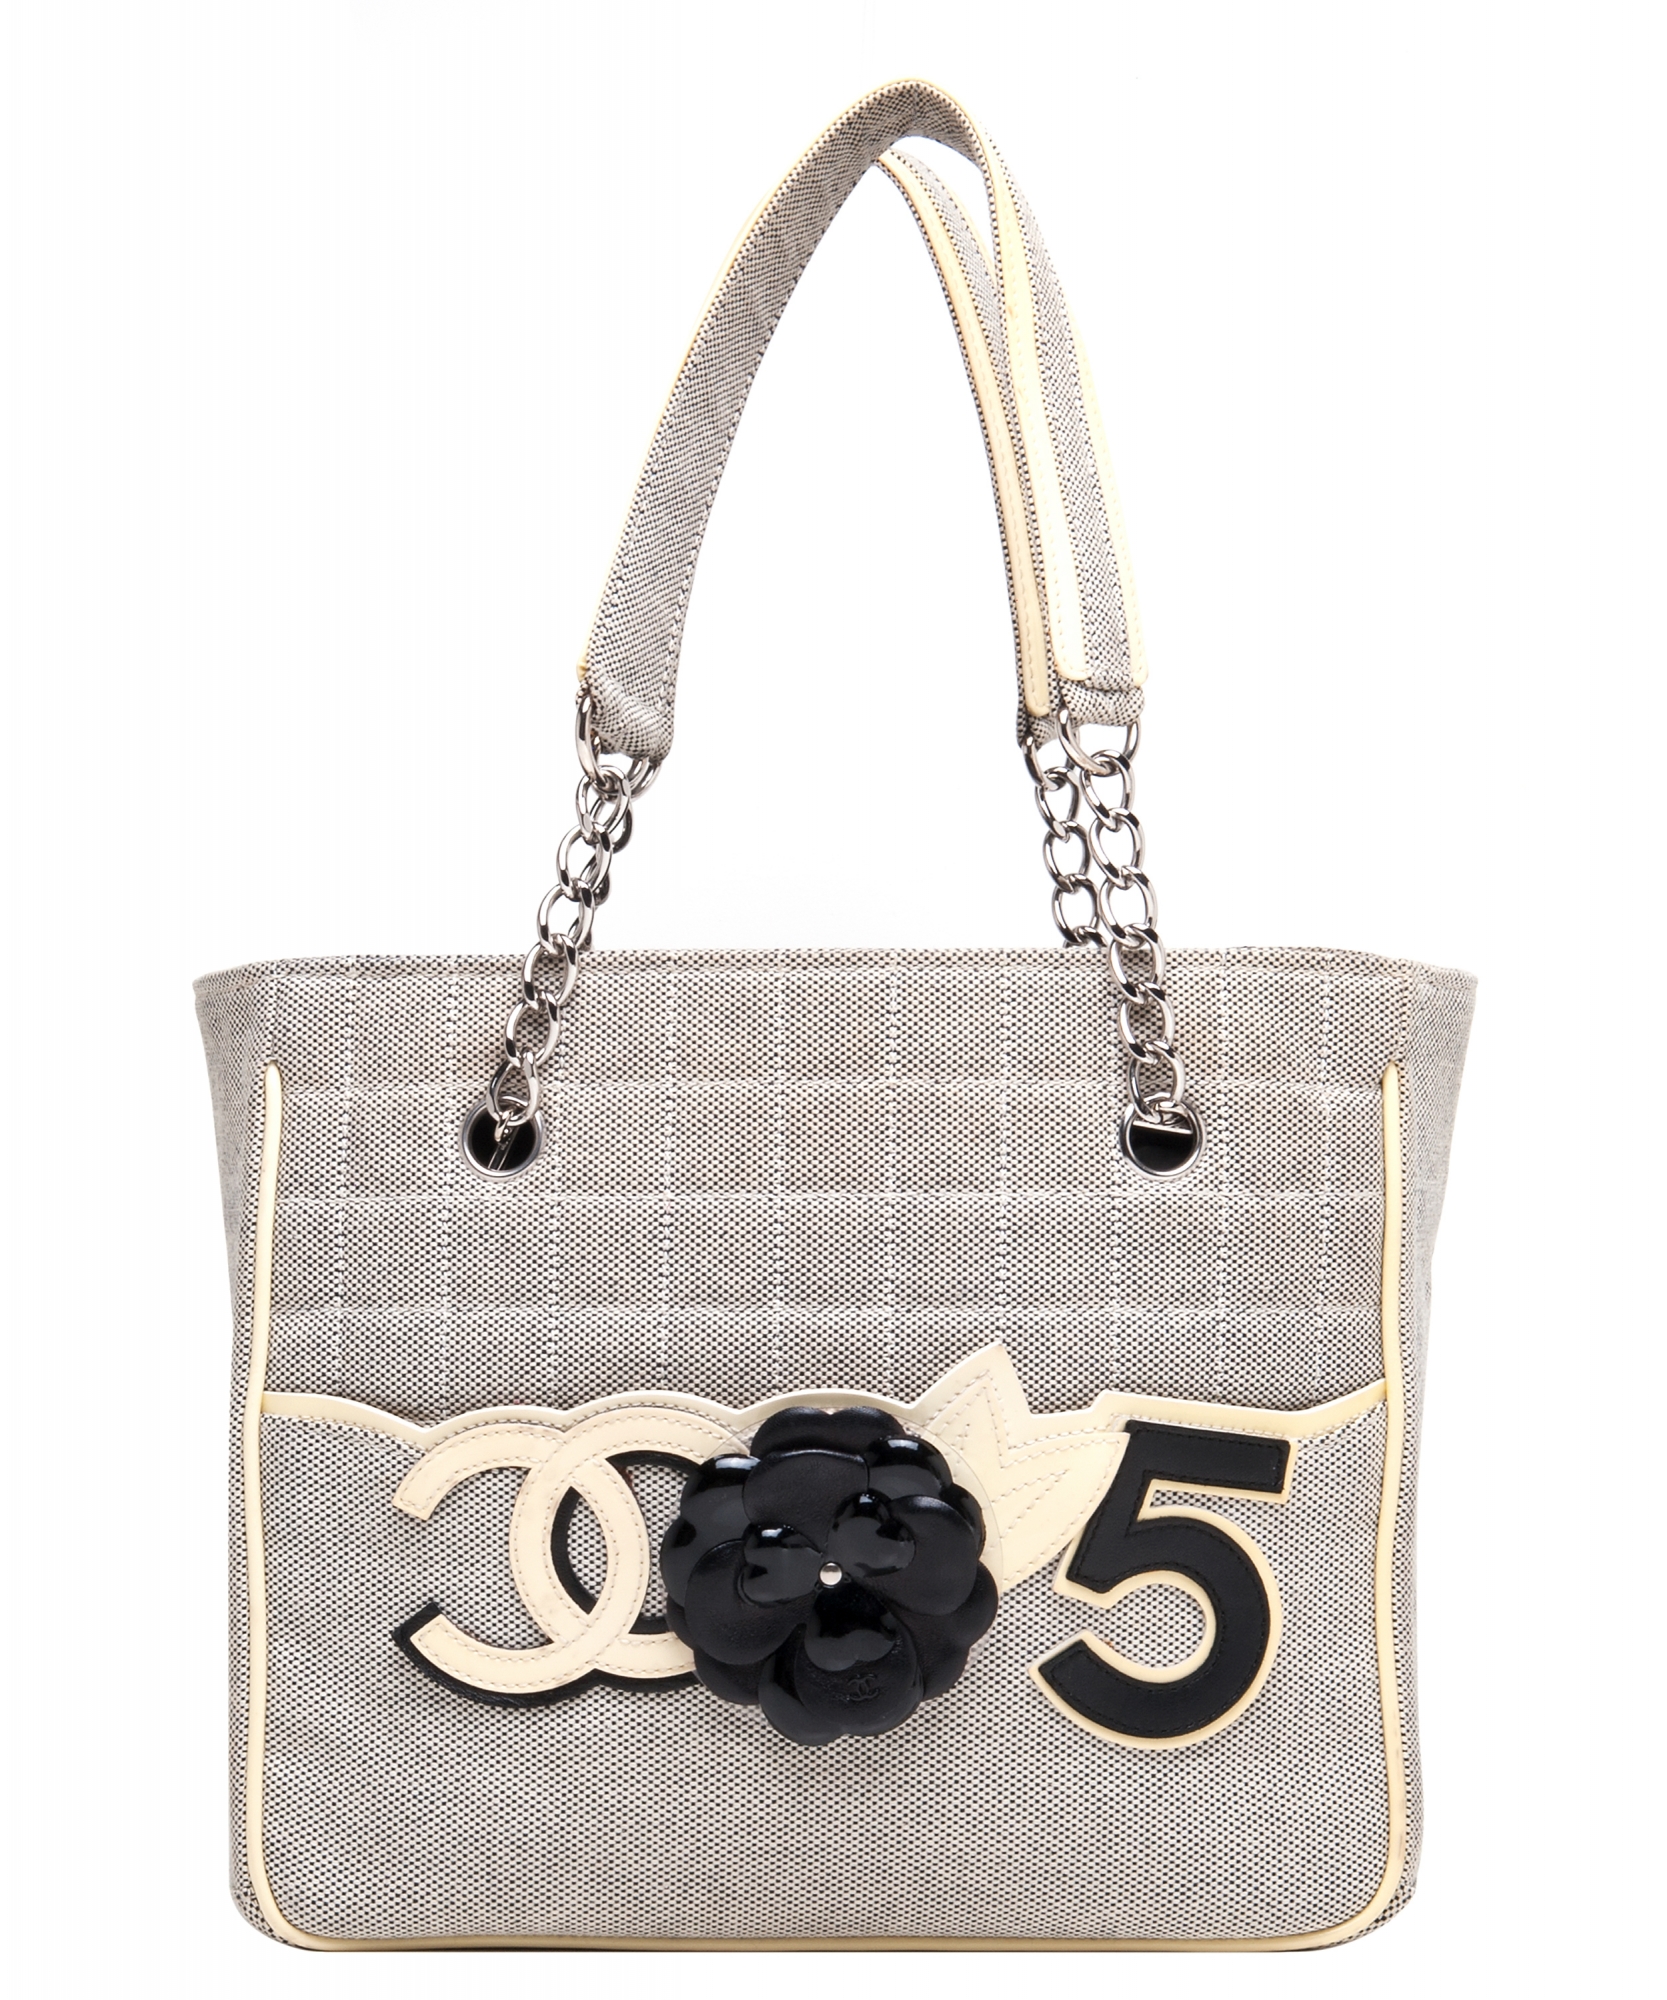 Chanel Tweed Petals Camellia Maxi Flap Bag in Soft Black Patent with Silver  Hardware  SOLD